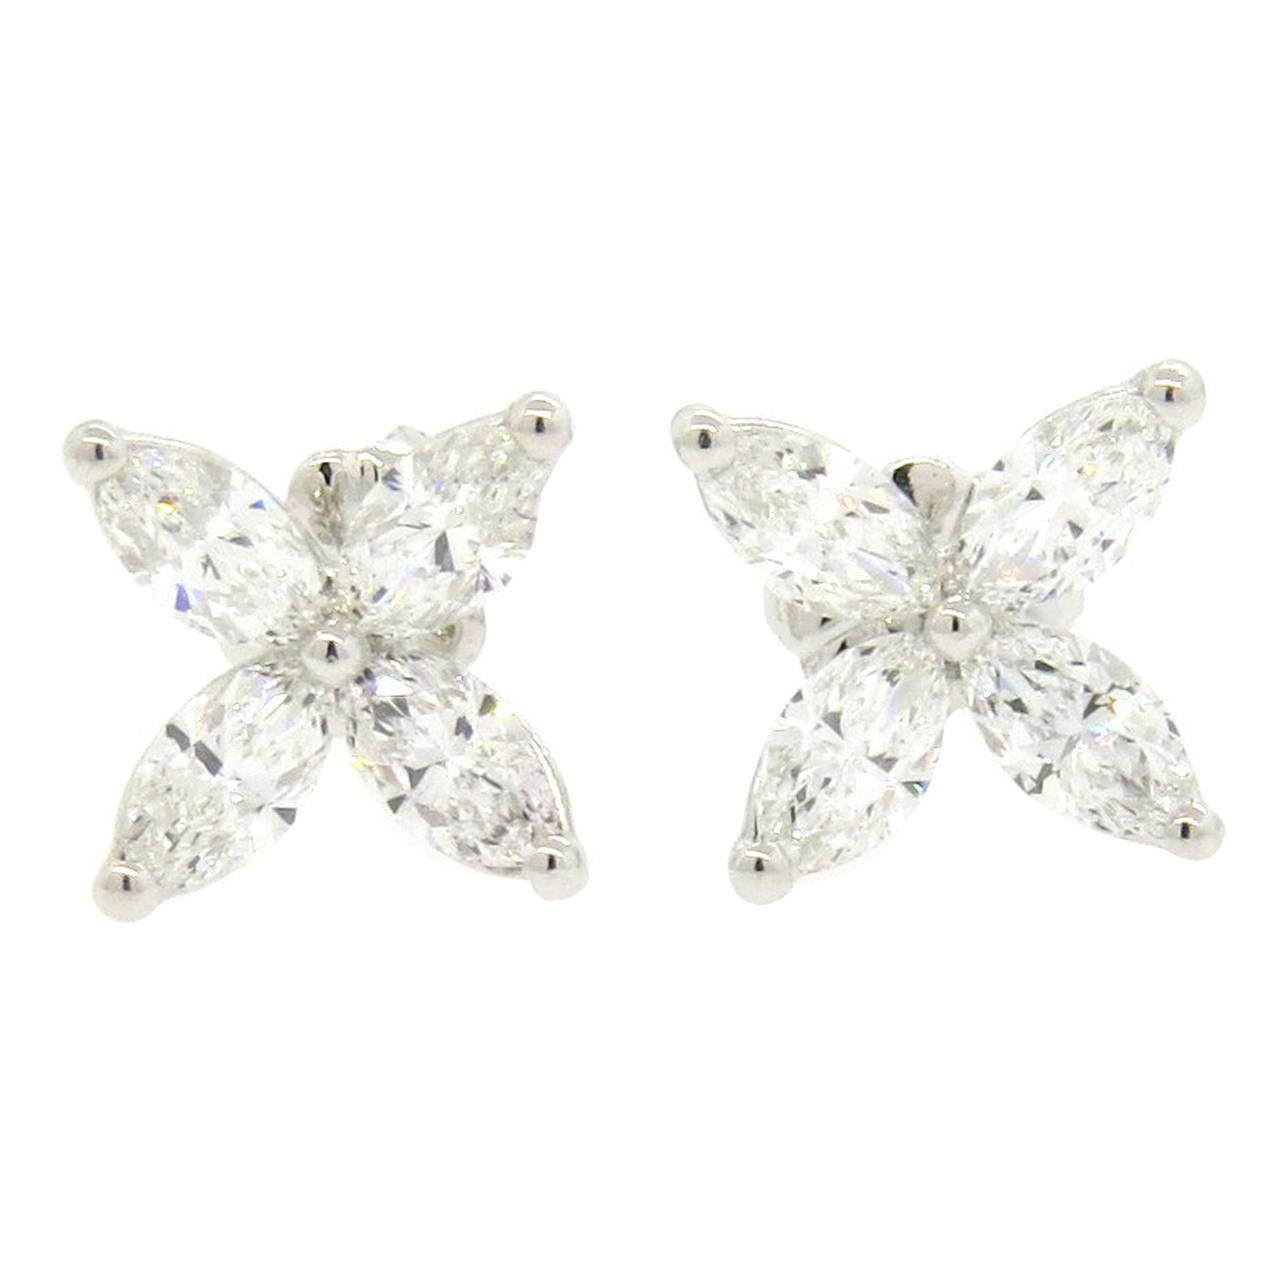 Tiffany Victoria Earrings
 Tiffany and Co Victoria Platinum Diamond Earrings at